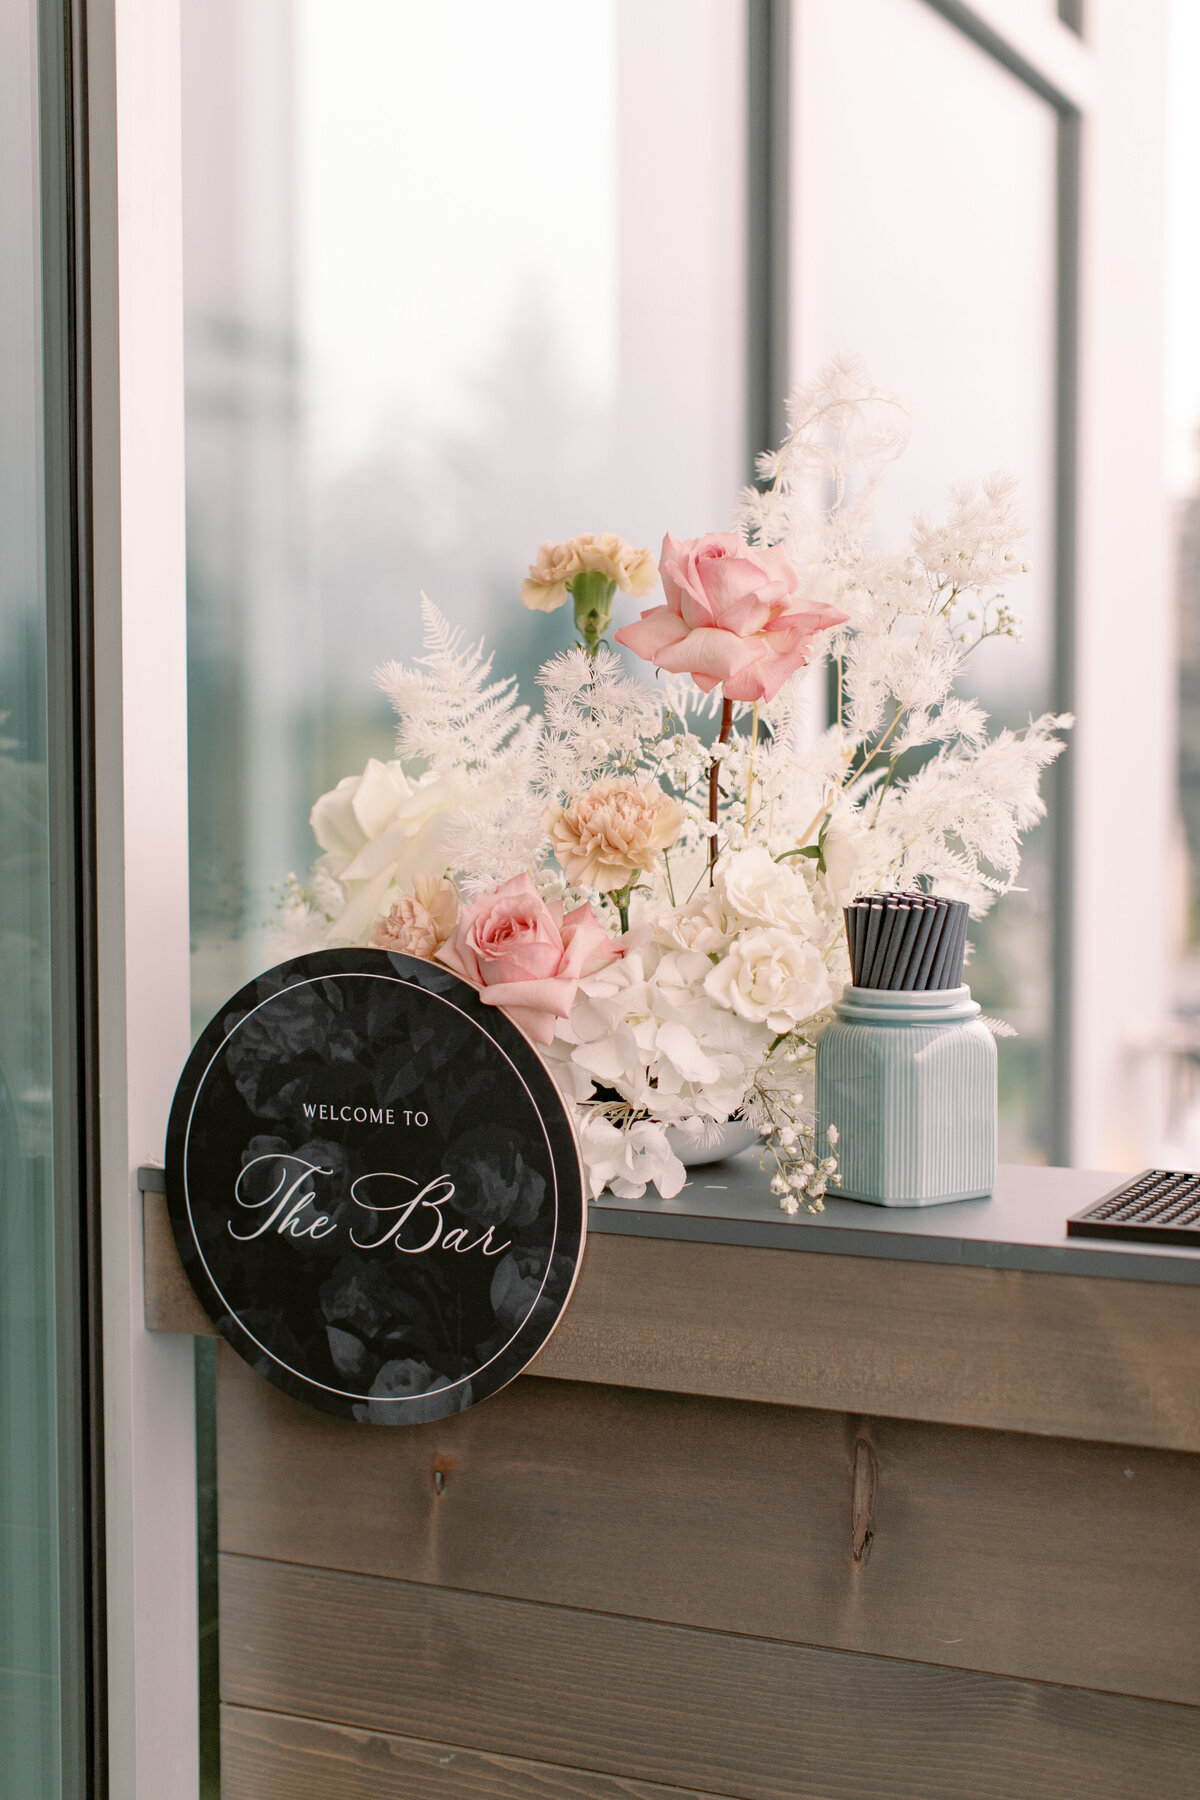 Modern Chic Wedding at The Sensory in Canmore Alberta, designed and planned by Rebekah Brontë, with a colour palette of fresh white, smoke grey, blush pink, and subtle seafoam - modern wedding  bar sign and floral arrangement